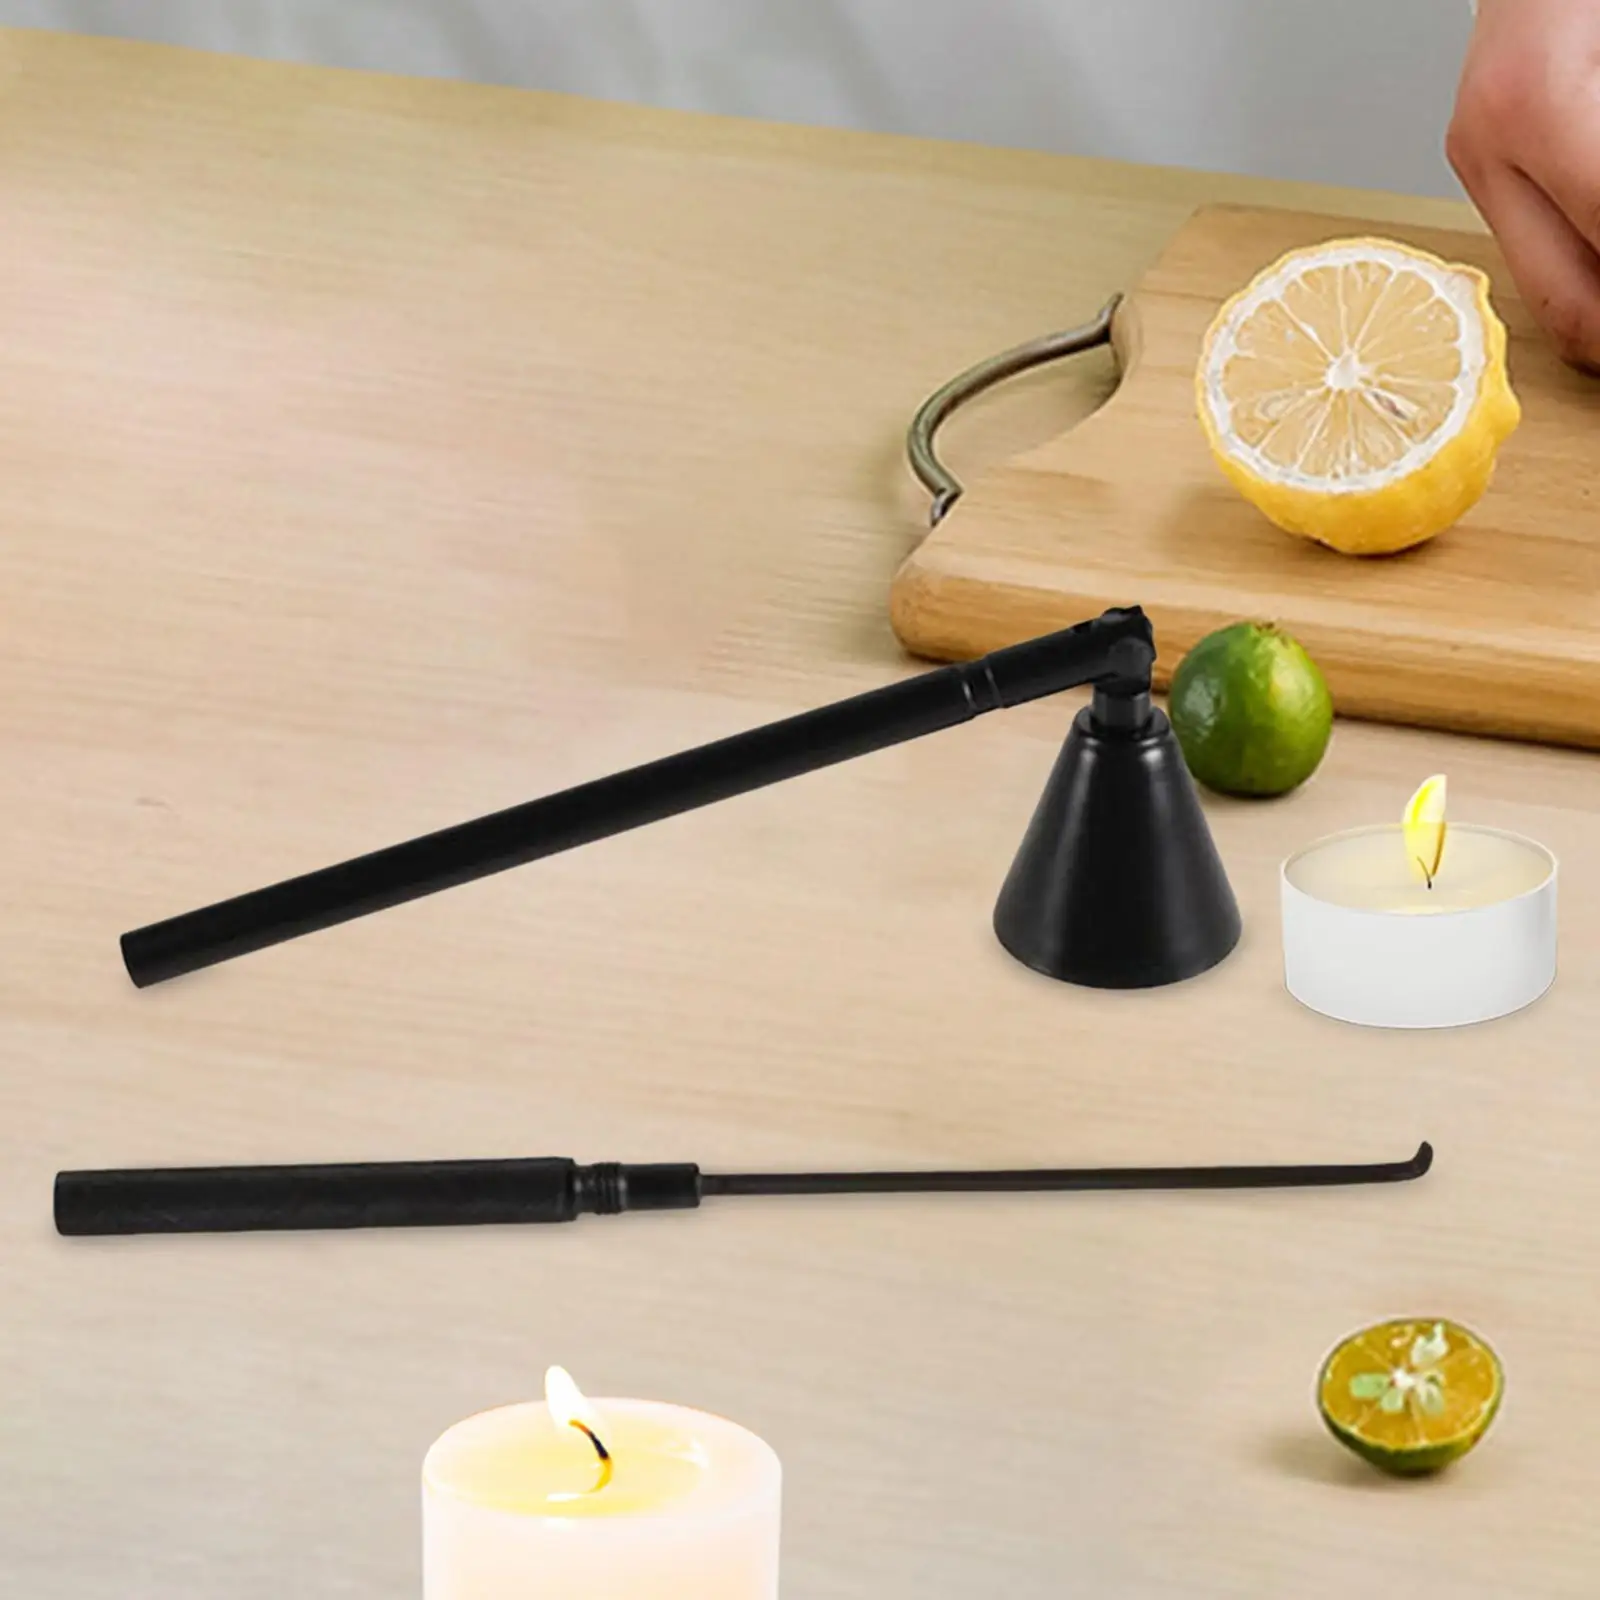 Candle Snuffer Candle Wick Hook Candle Care Tools Candle Accessories Candle Wick Cover for Tea Light Candle Home DIY Gifts